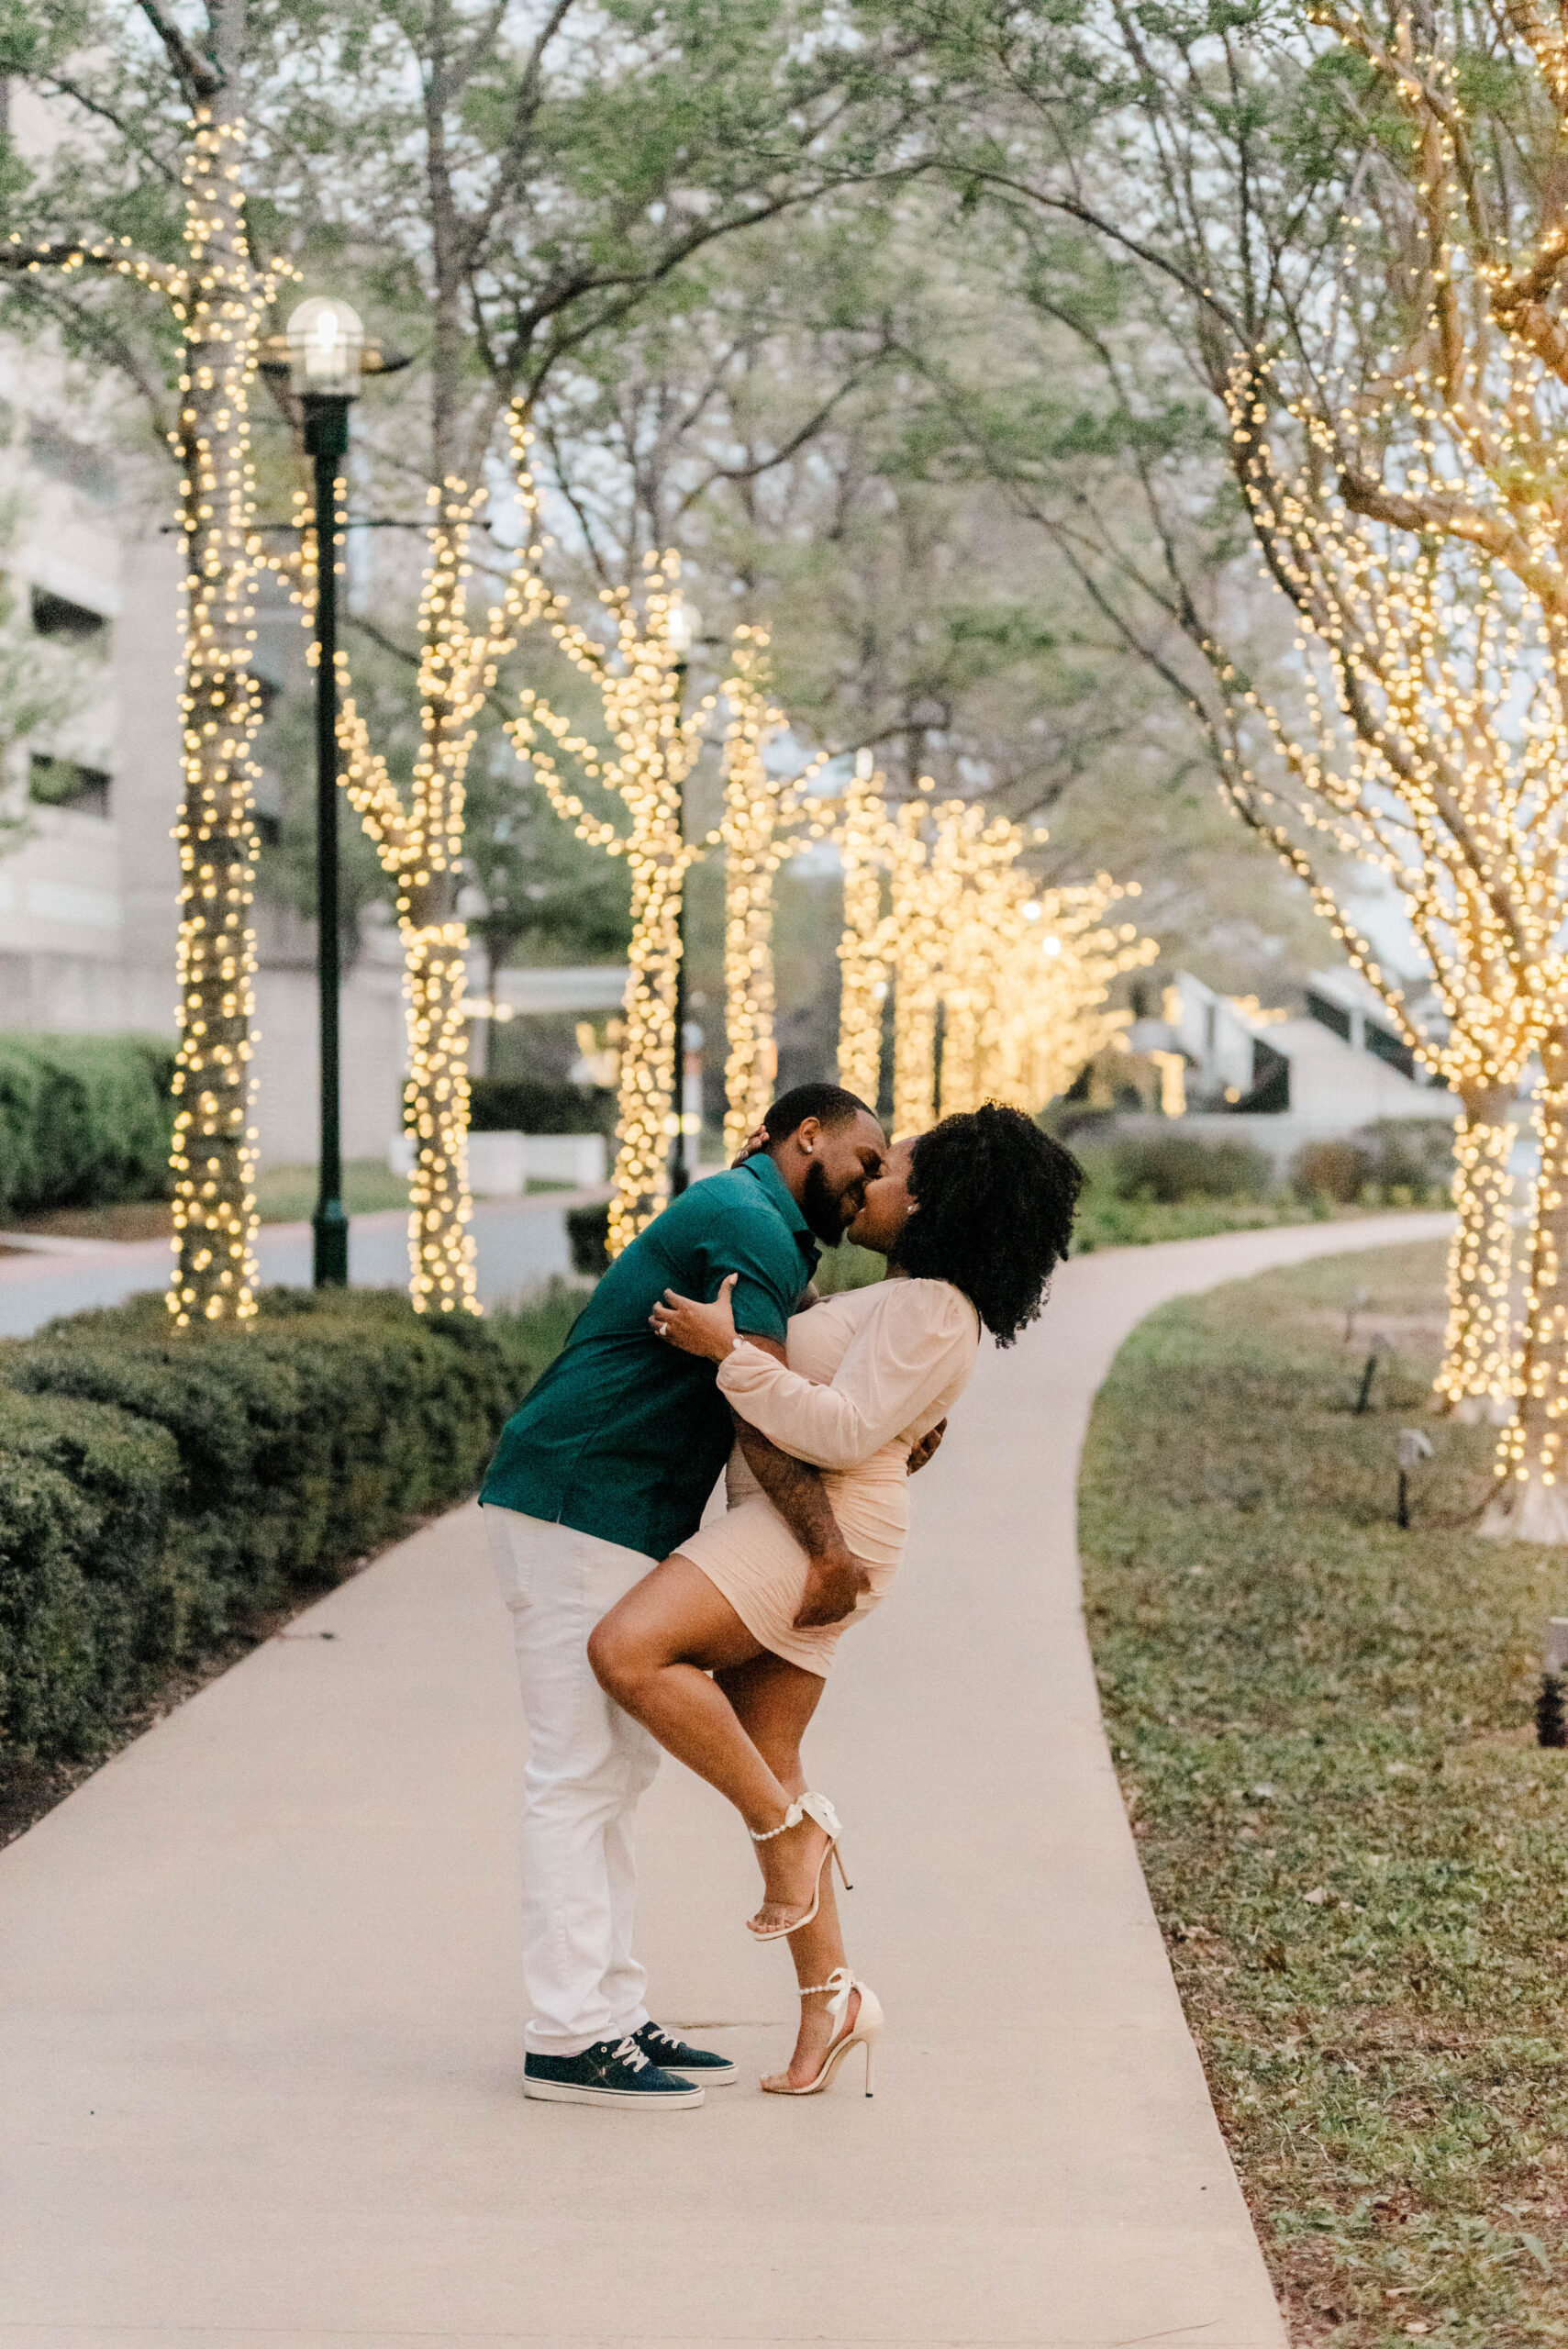 Emonie and CJ's Engagement Session in The Woodlands, Texas with Rachel Driskell Photography